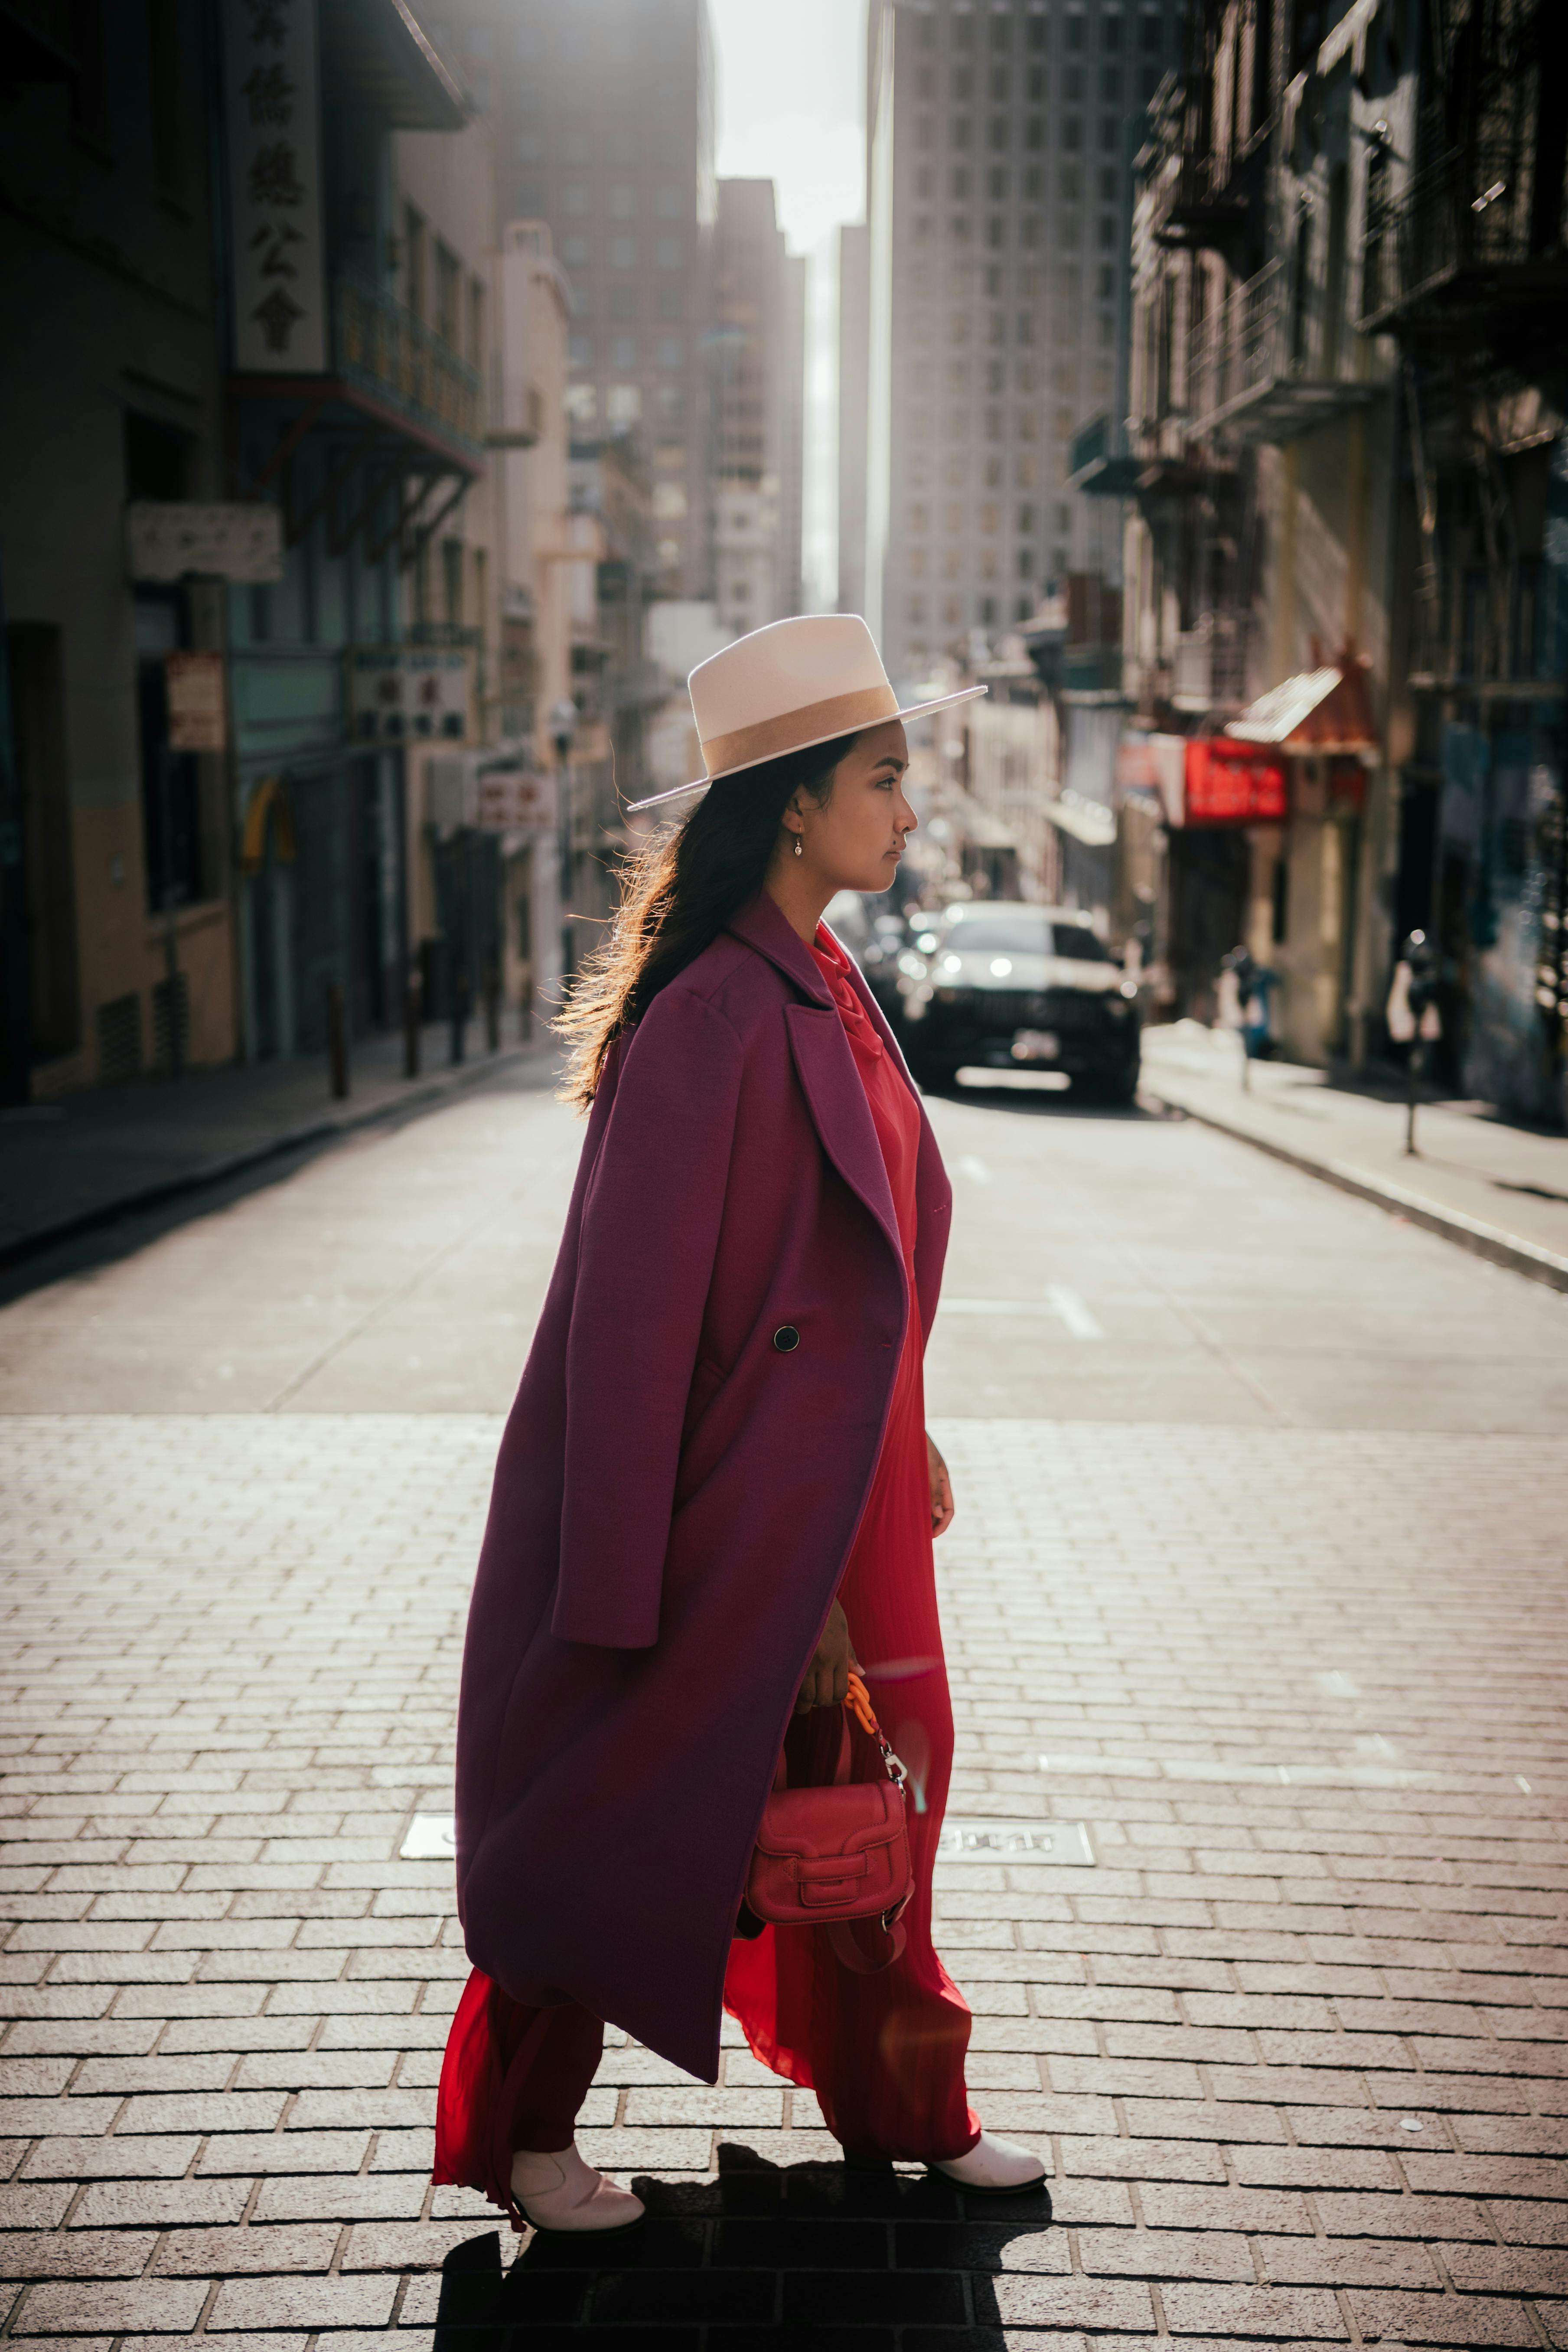 woman in red coat and white knit cap standing on sidewalk